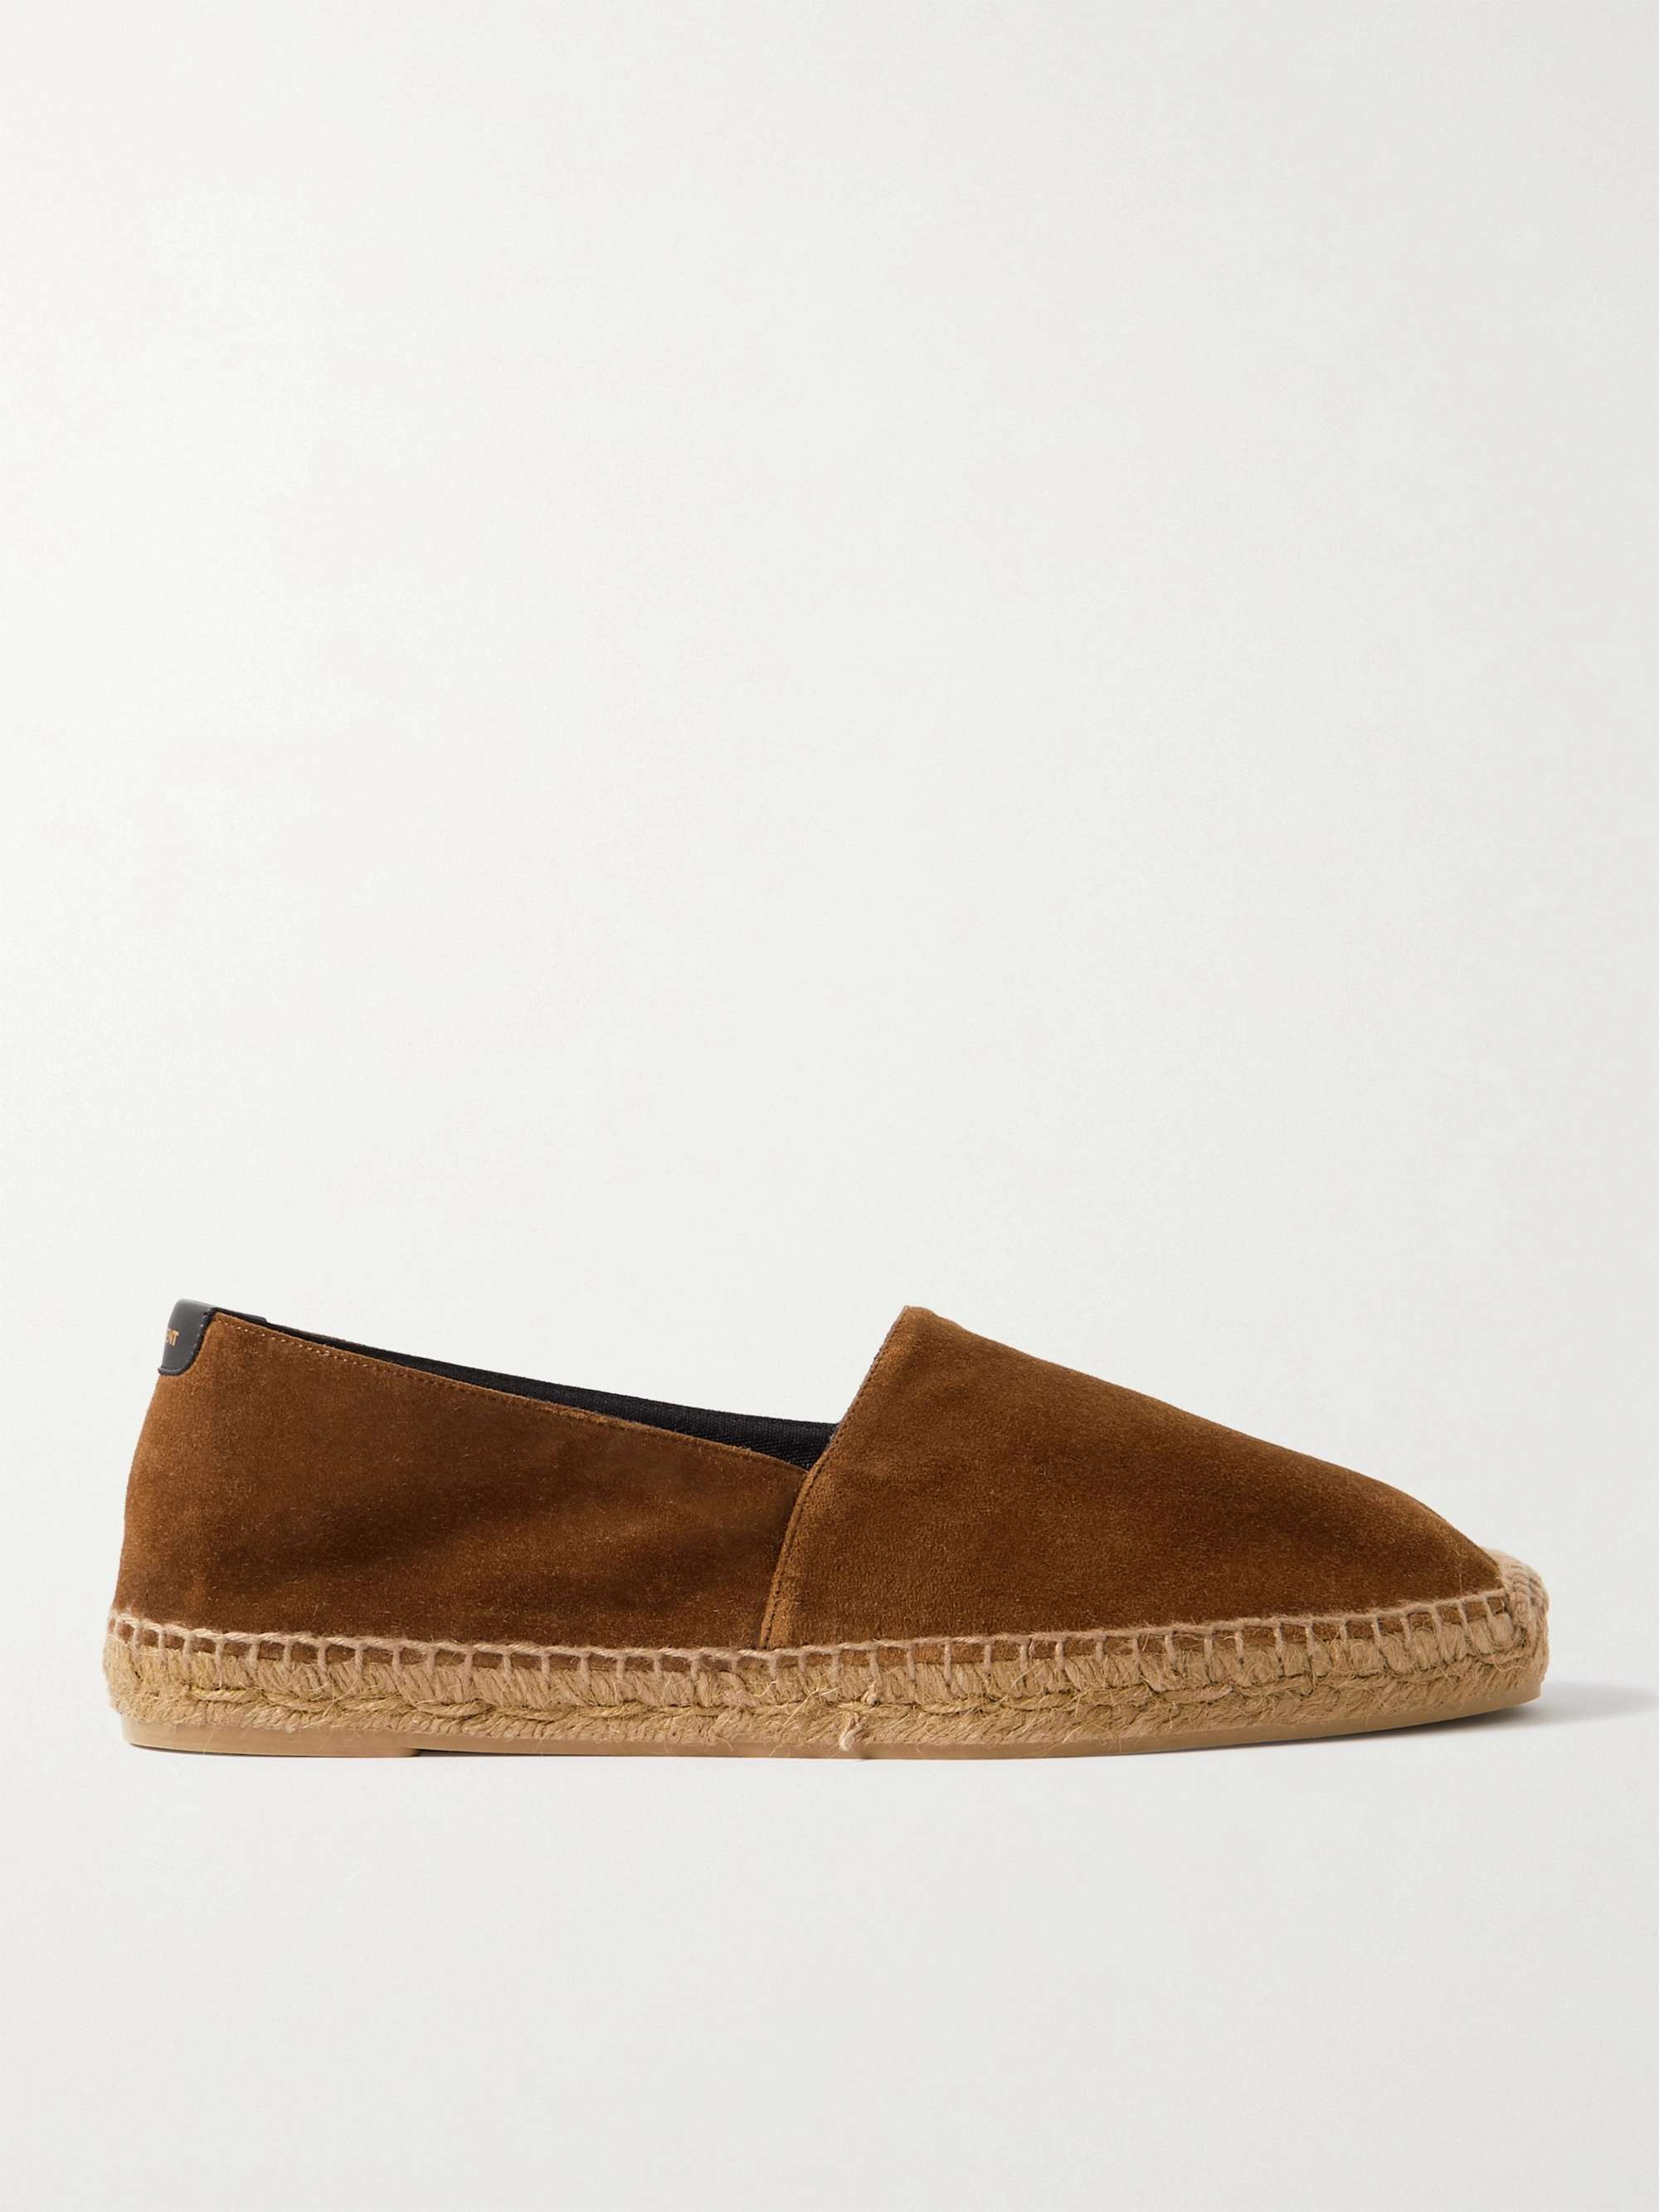 Mens Shoes Slip-on shoes Espadrille shoes and sandals Saint Laurent Leather-trimmed Suede Espadrilles in Brown for Men 